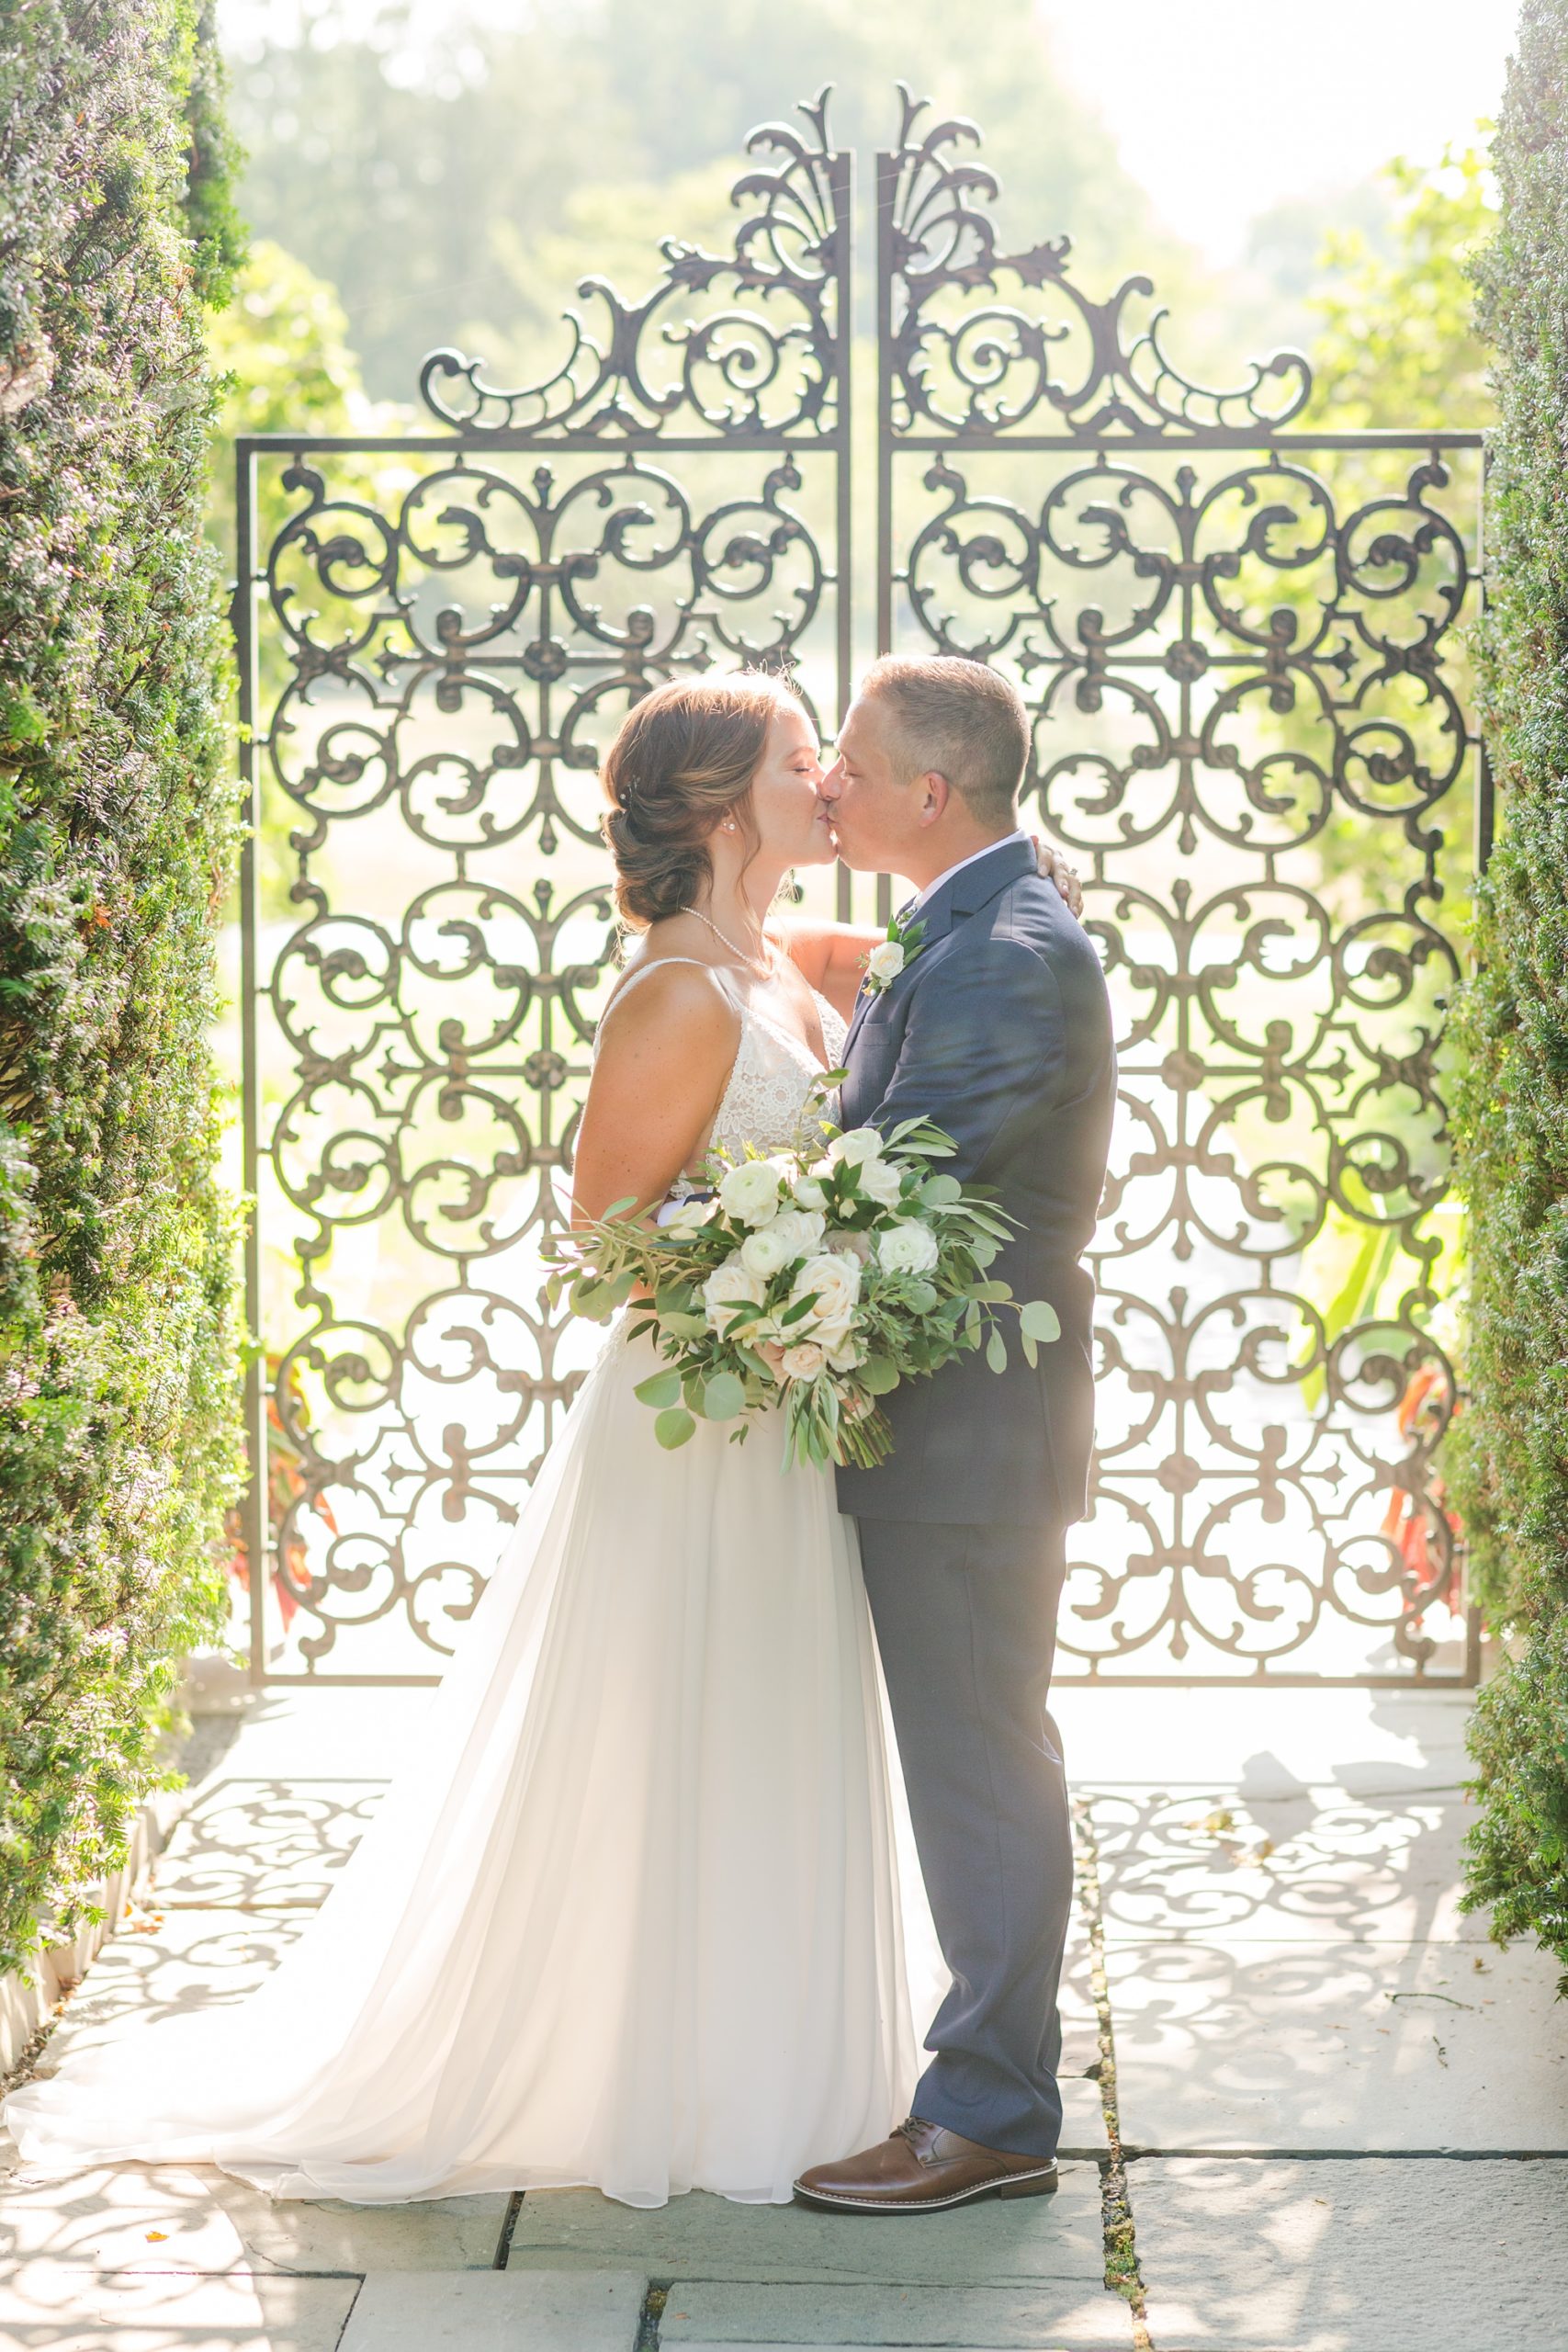 newlyweds kiss by iron fence at Drumore Estate